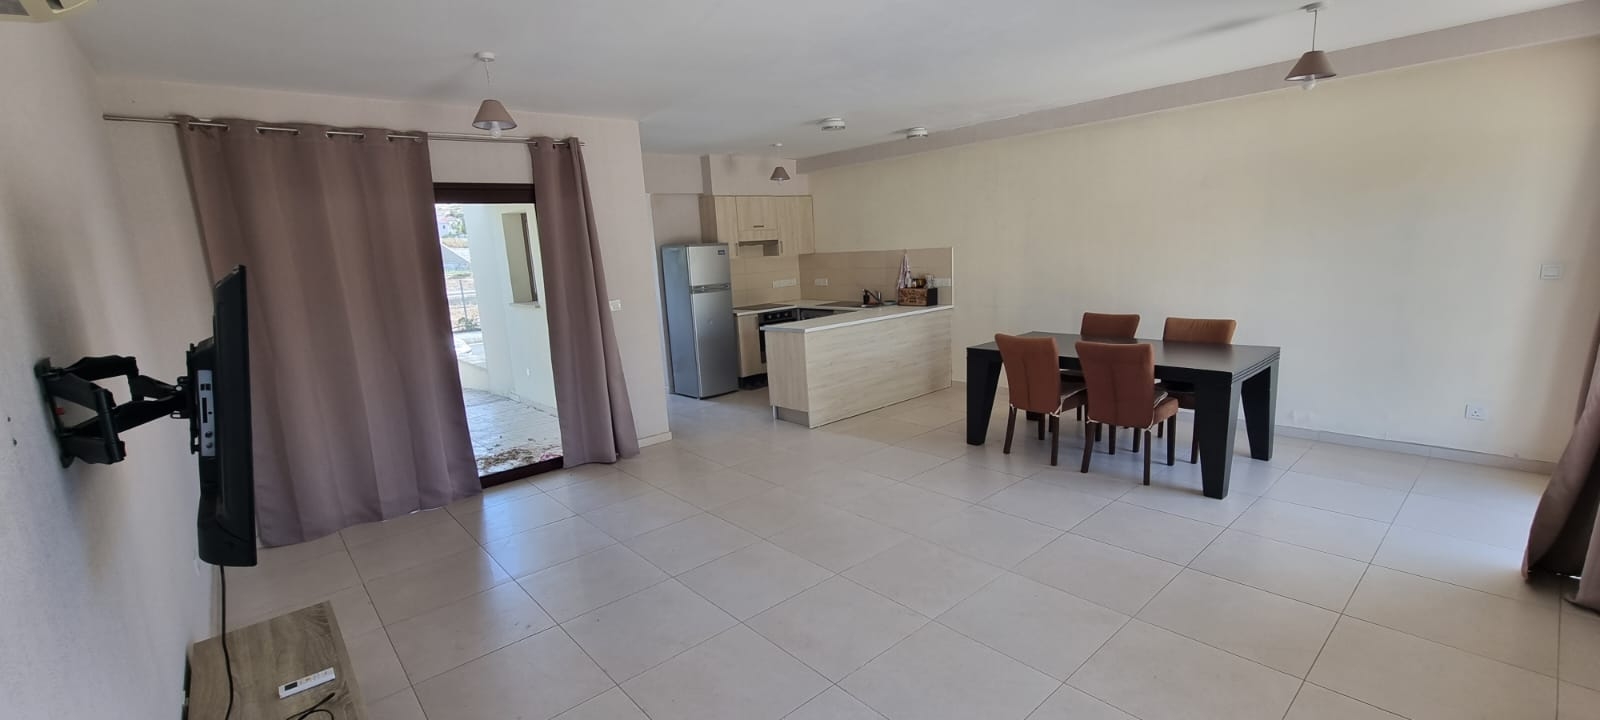 3 Bedroom House for Sale in Germasogeia – Tourist Area, Limassol District